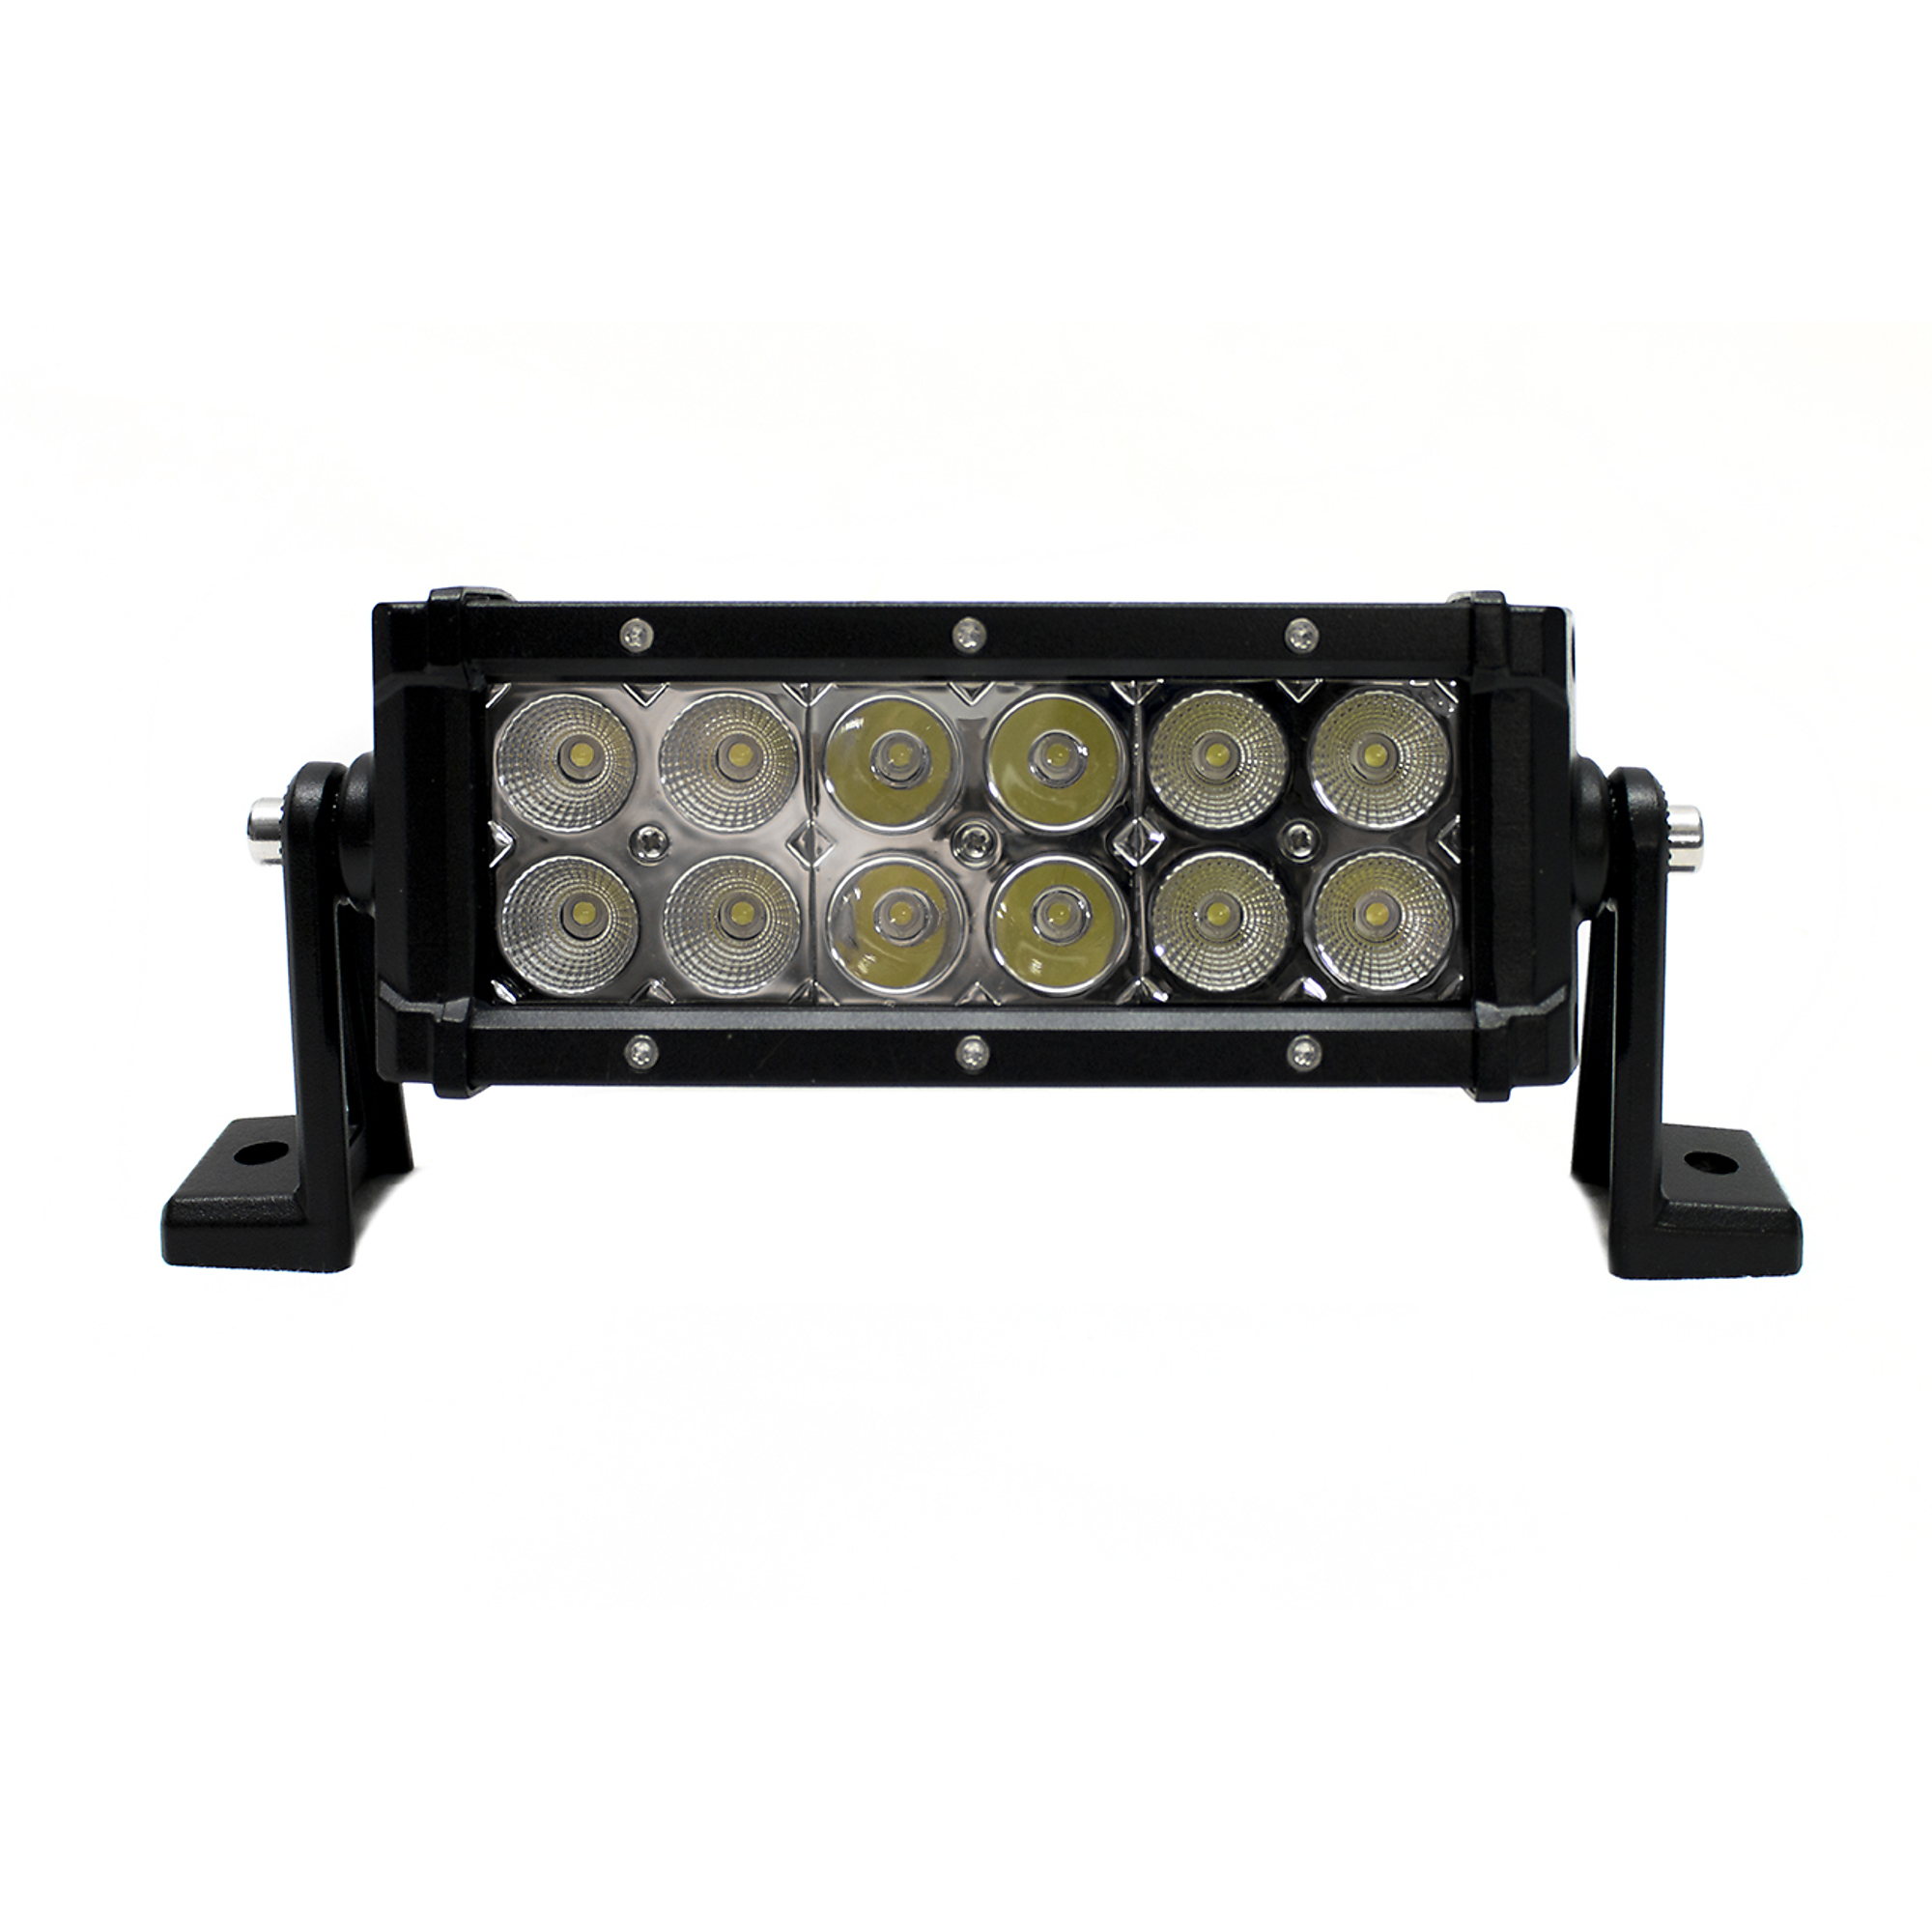 Race Sport Lighting, Excursion Series 8Inch 36W LED Light Bar 2-Rows, Light Type LED, Lens Color Clear, Included (qty.) 1 Model 1006487